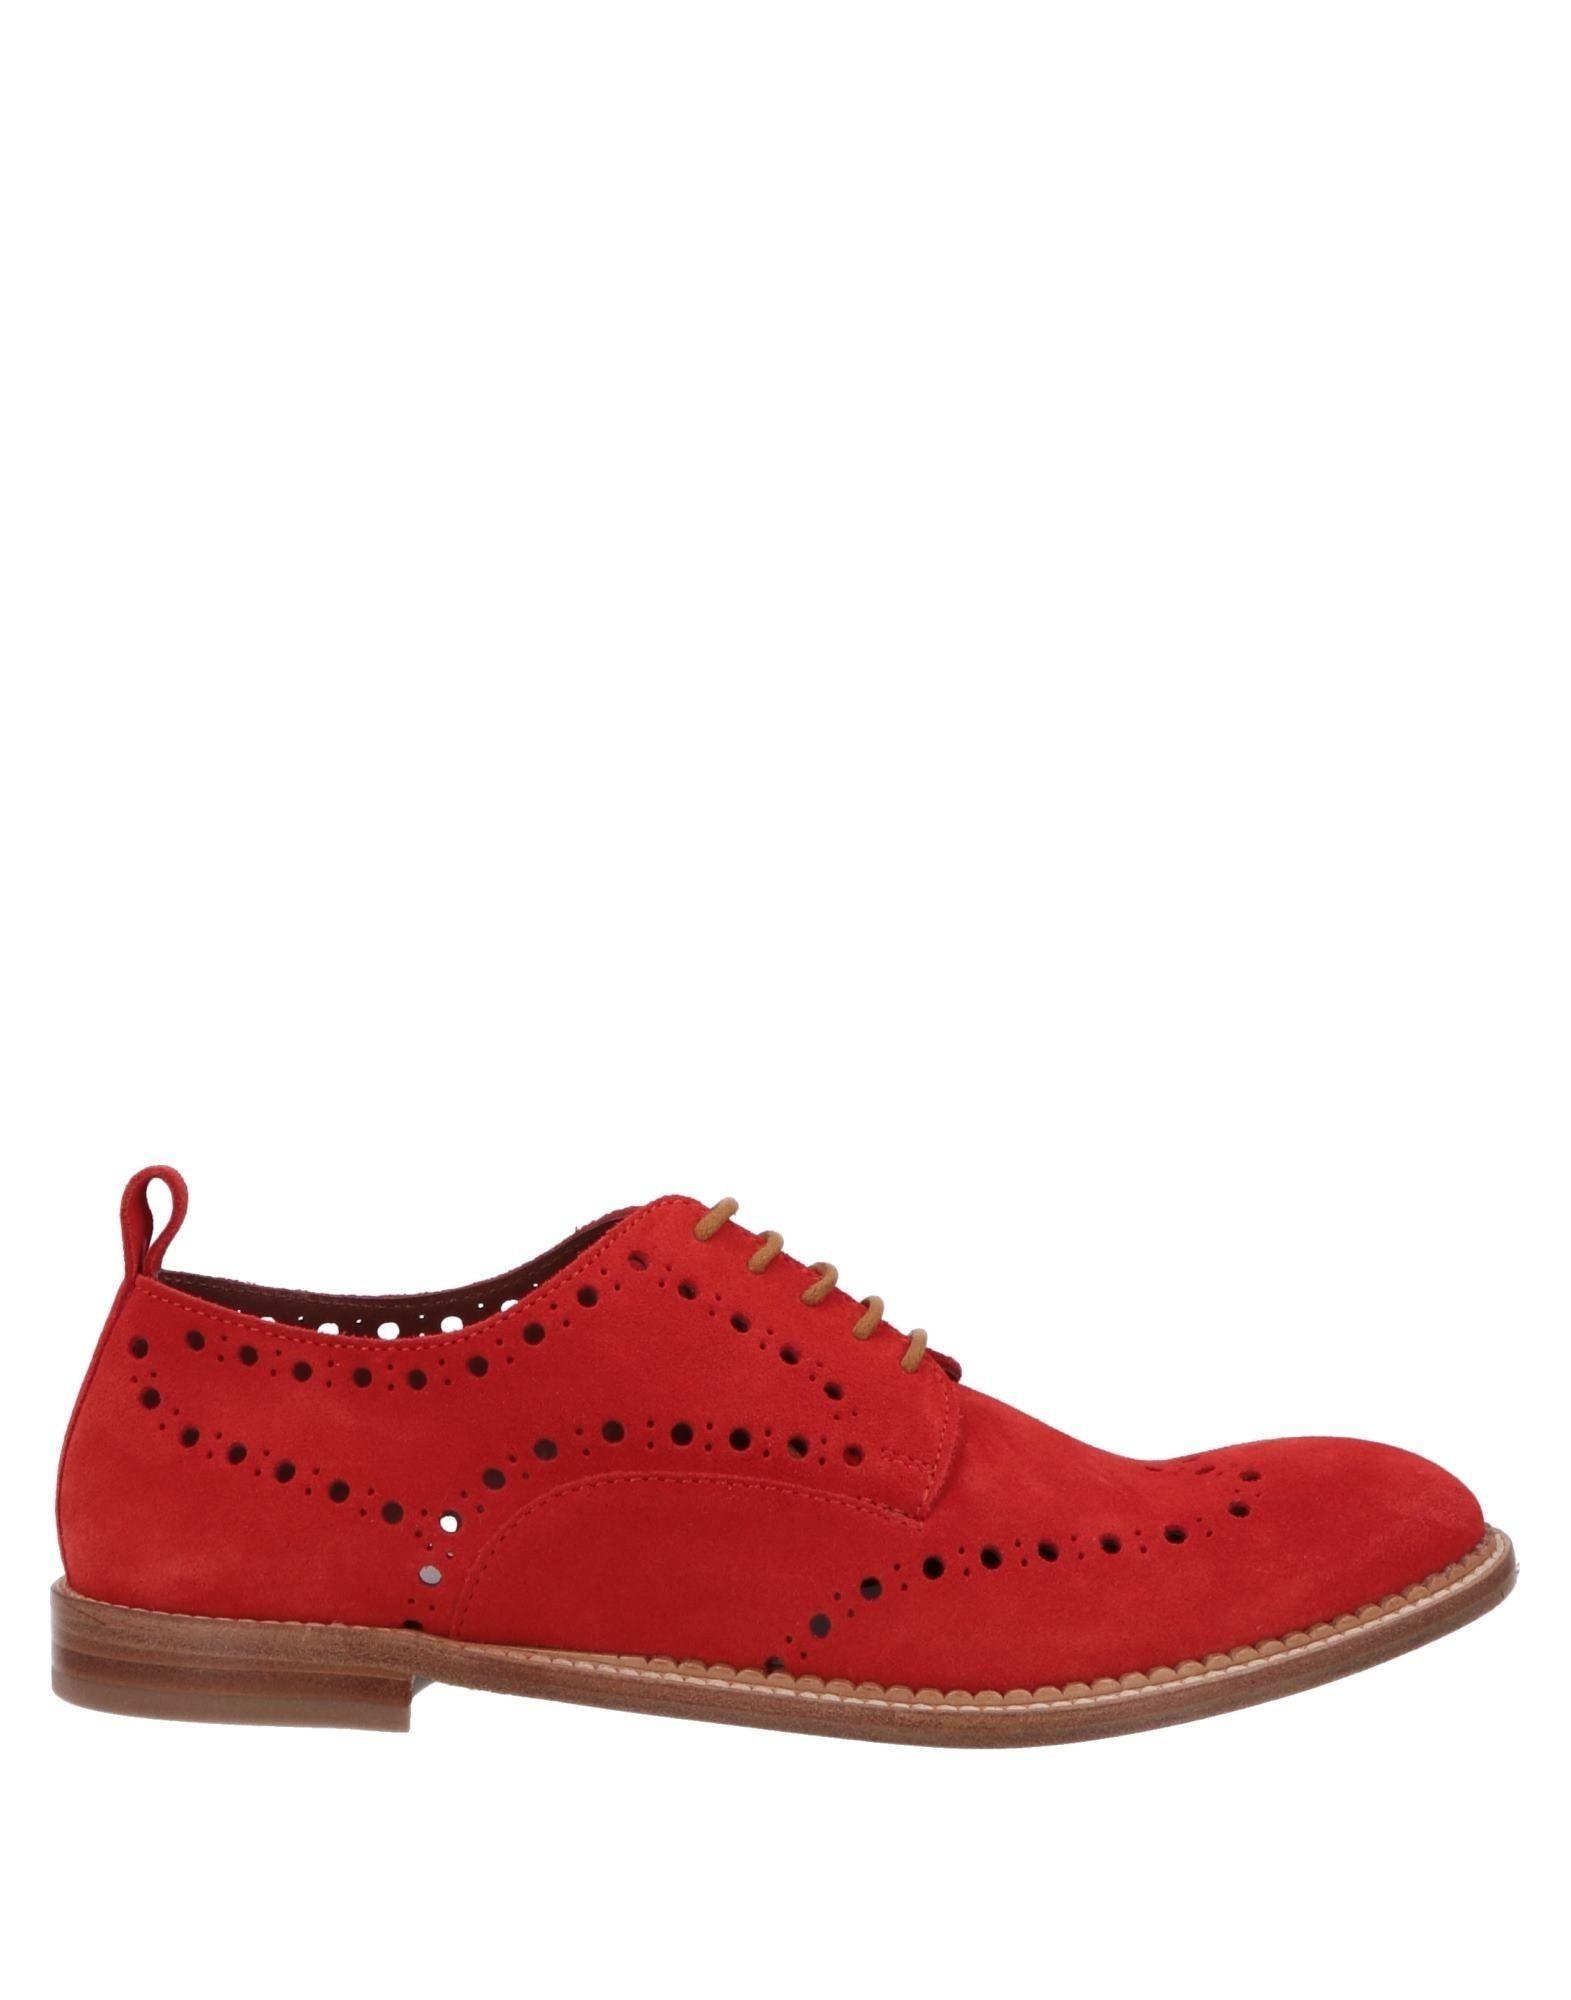 Triver Flight Suede Lace-up Shoe in Red - Lyst